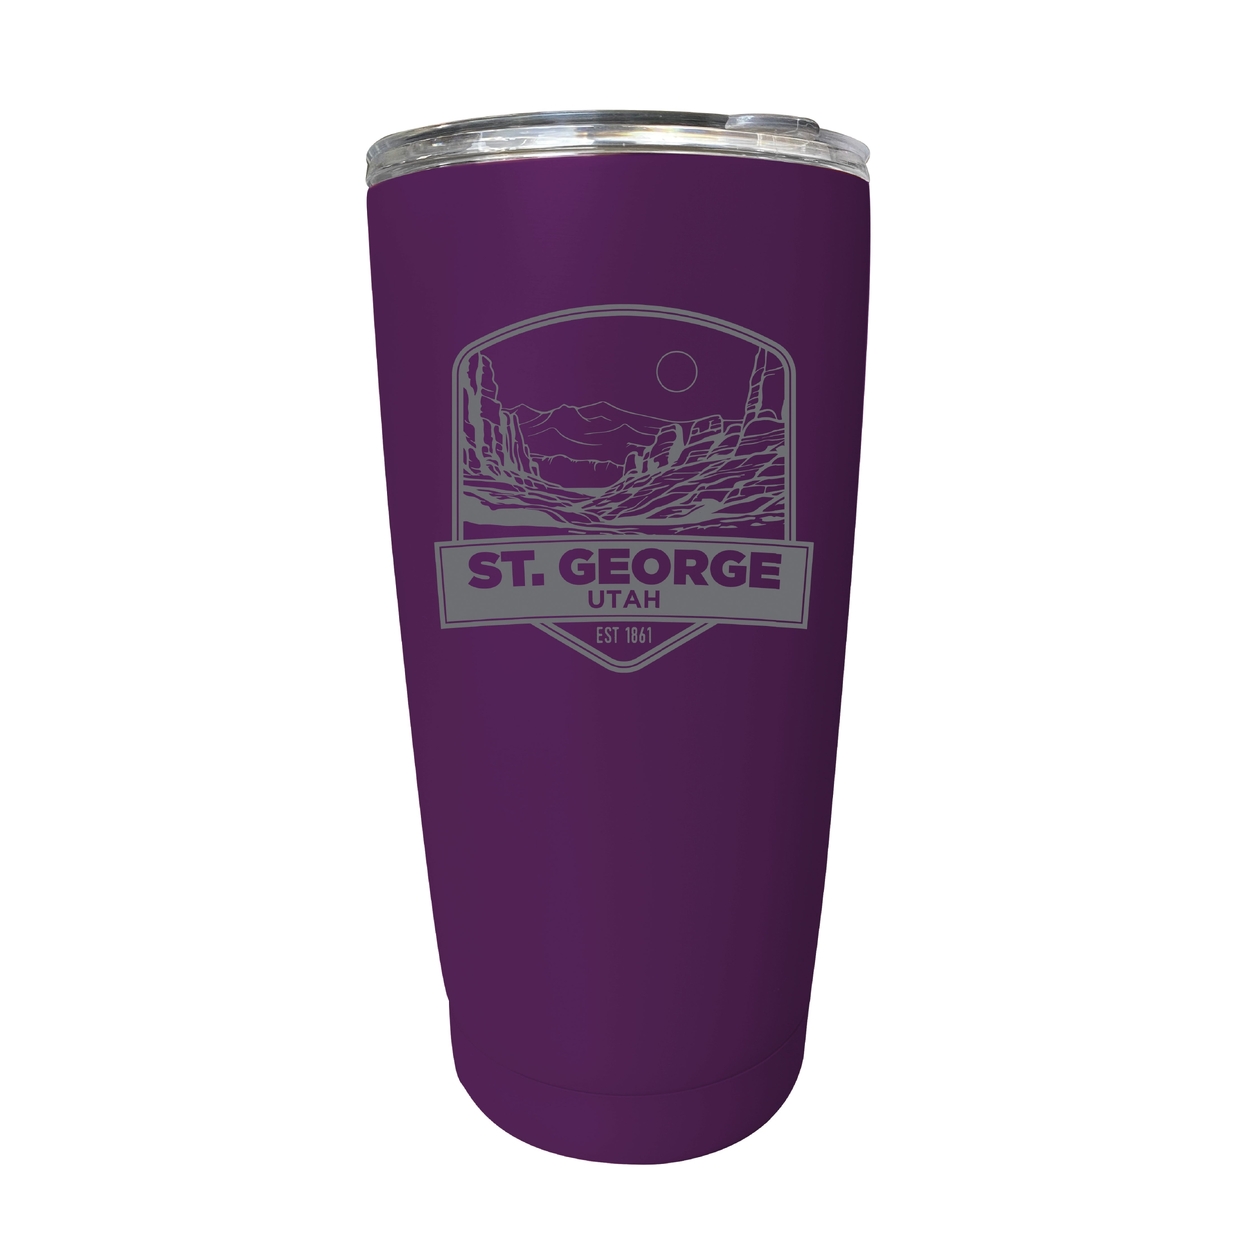 St. George Utah Souvenir 16 Oz Engraved Stainless Steel Insulated Tumbler - Green,,4-Pack